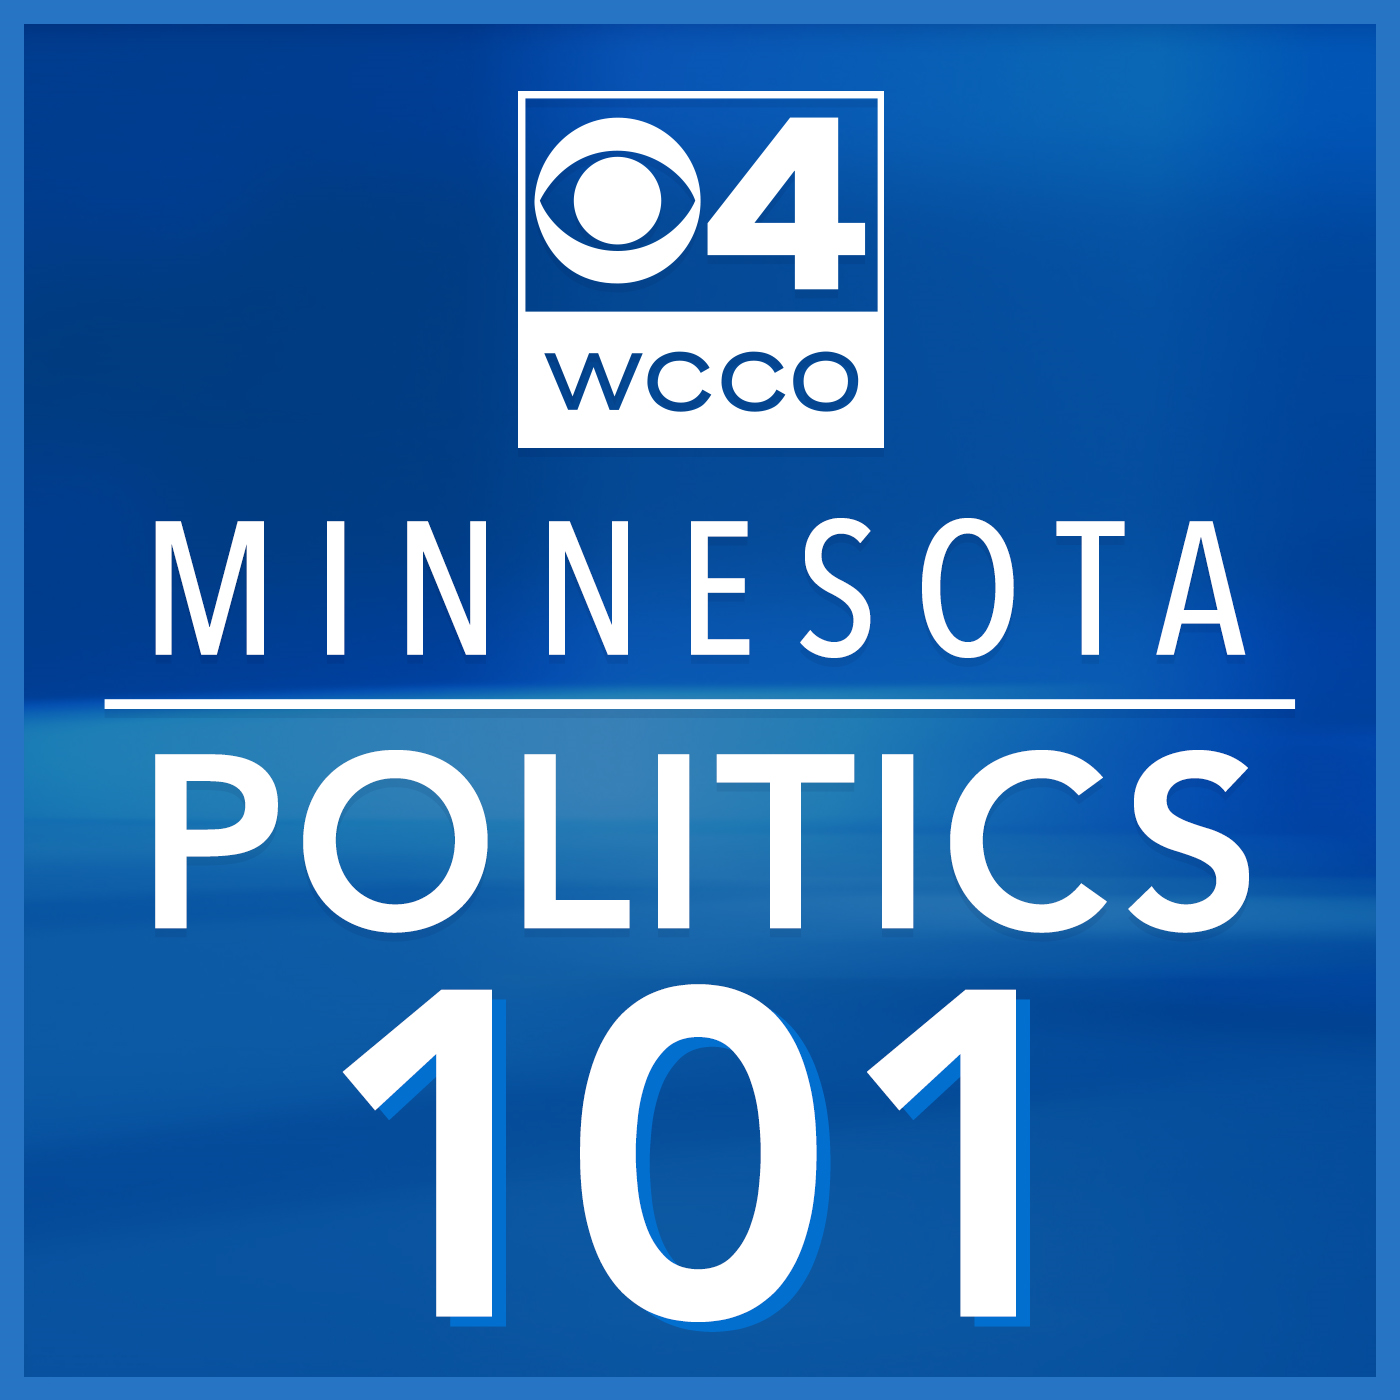 Cheers from the Fair - Minnesota Politics 101 with Pat Kessler